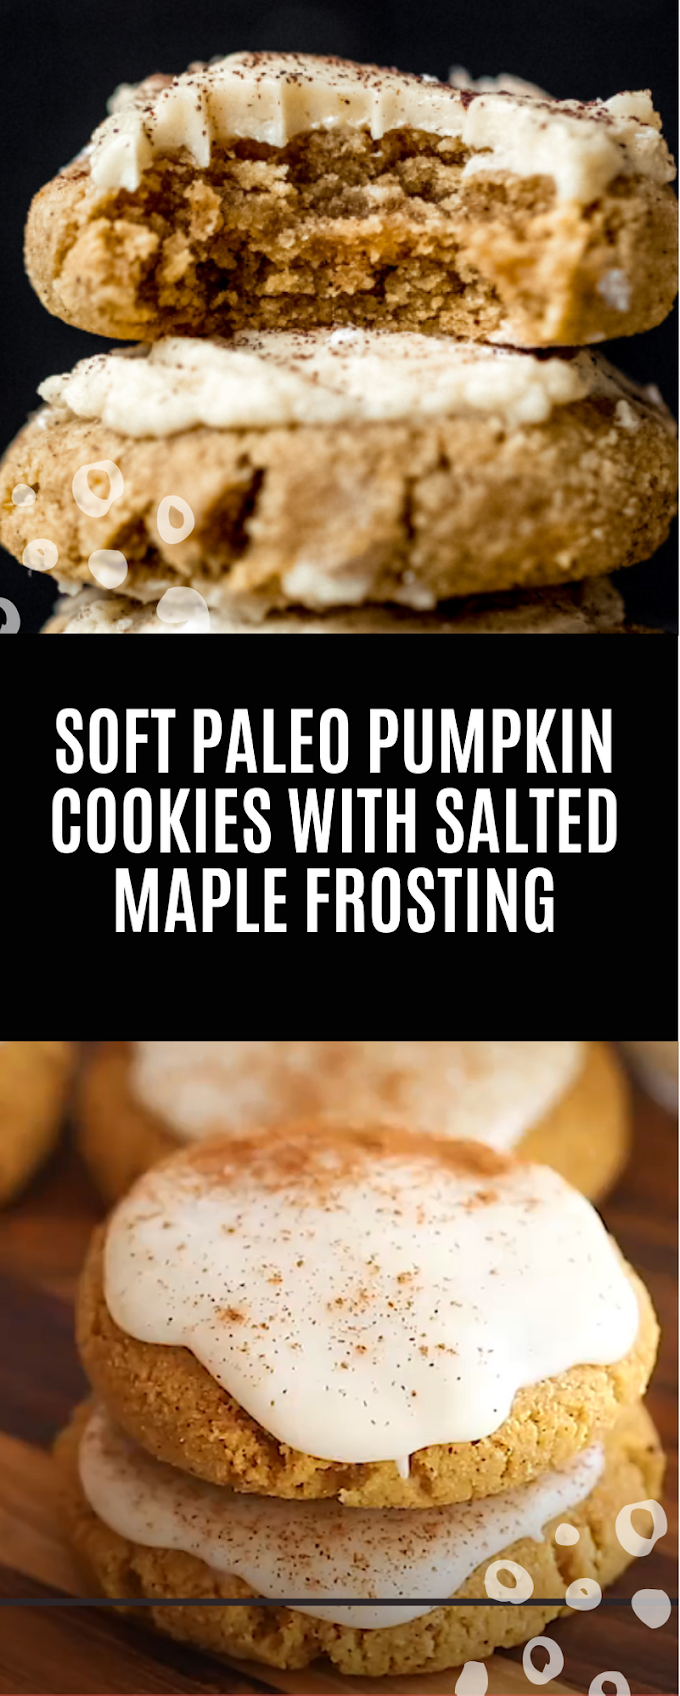 Soft Paleo Pumpkin Cookies with Salted Maple Frosting